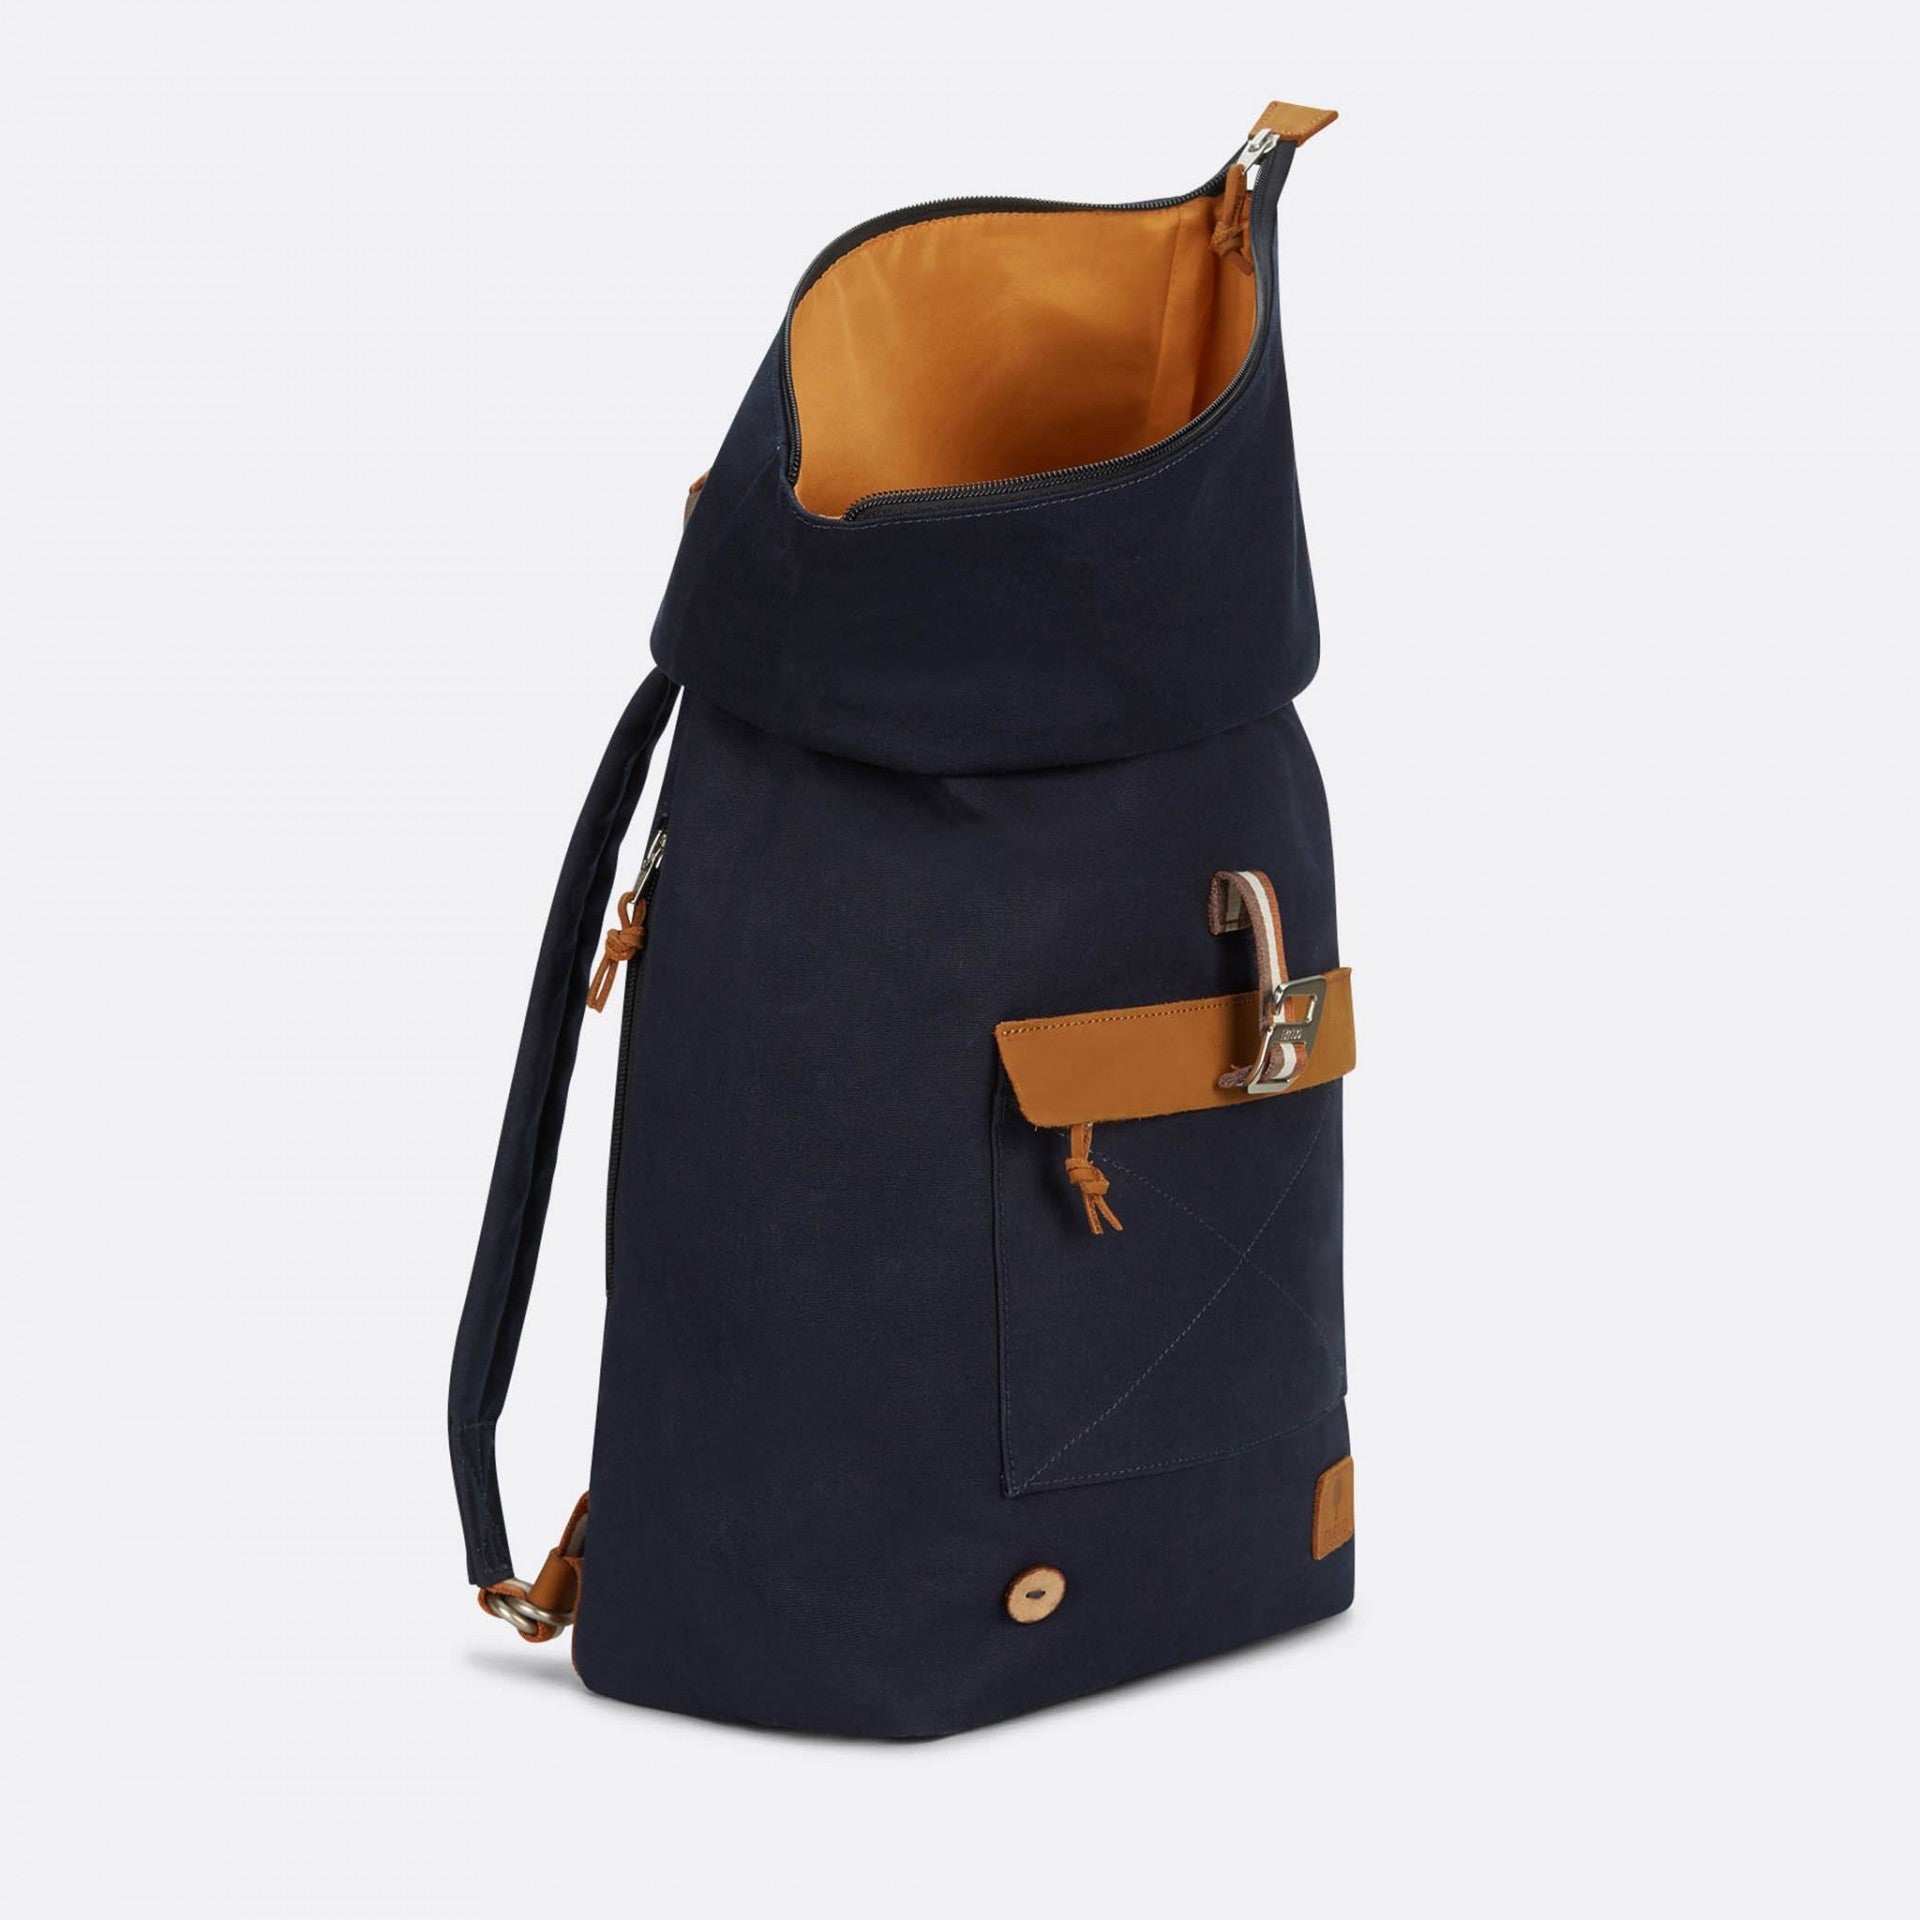 Faguo - Navy & tawny cotton backpack - The Good Chic